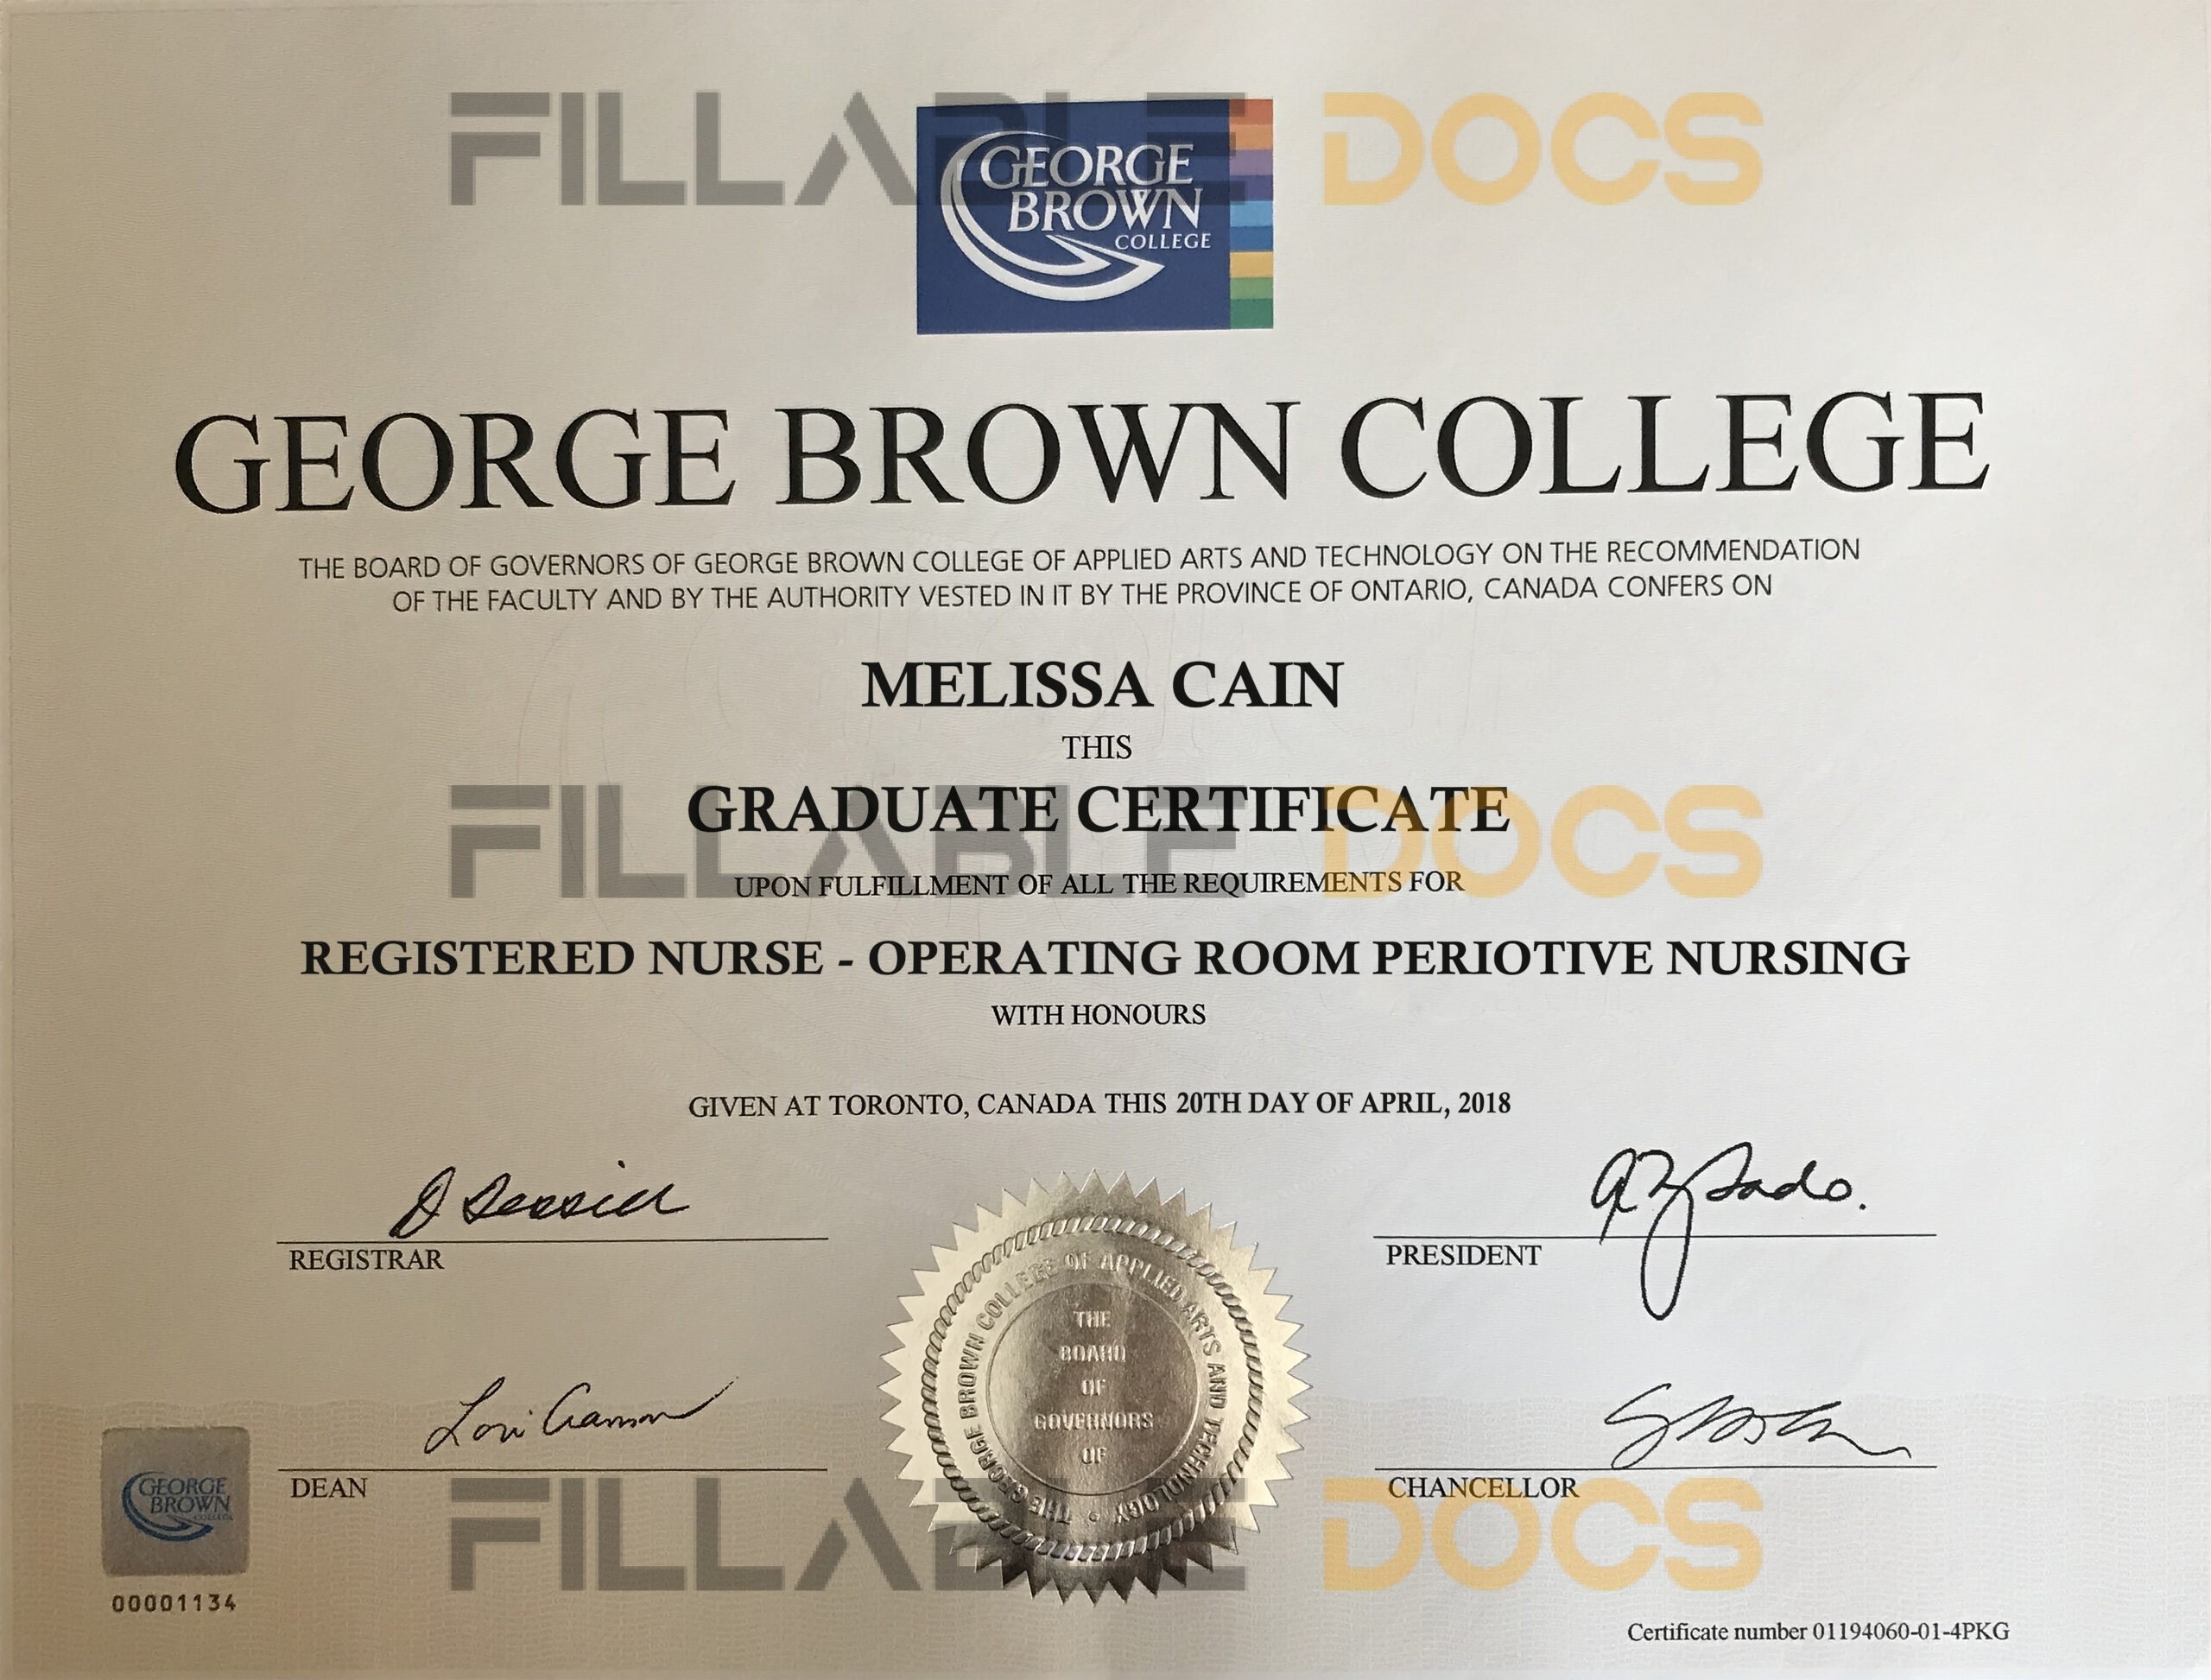 Authentic-Looking Fake Graduate Certificate from George Brown College